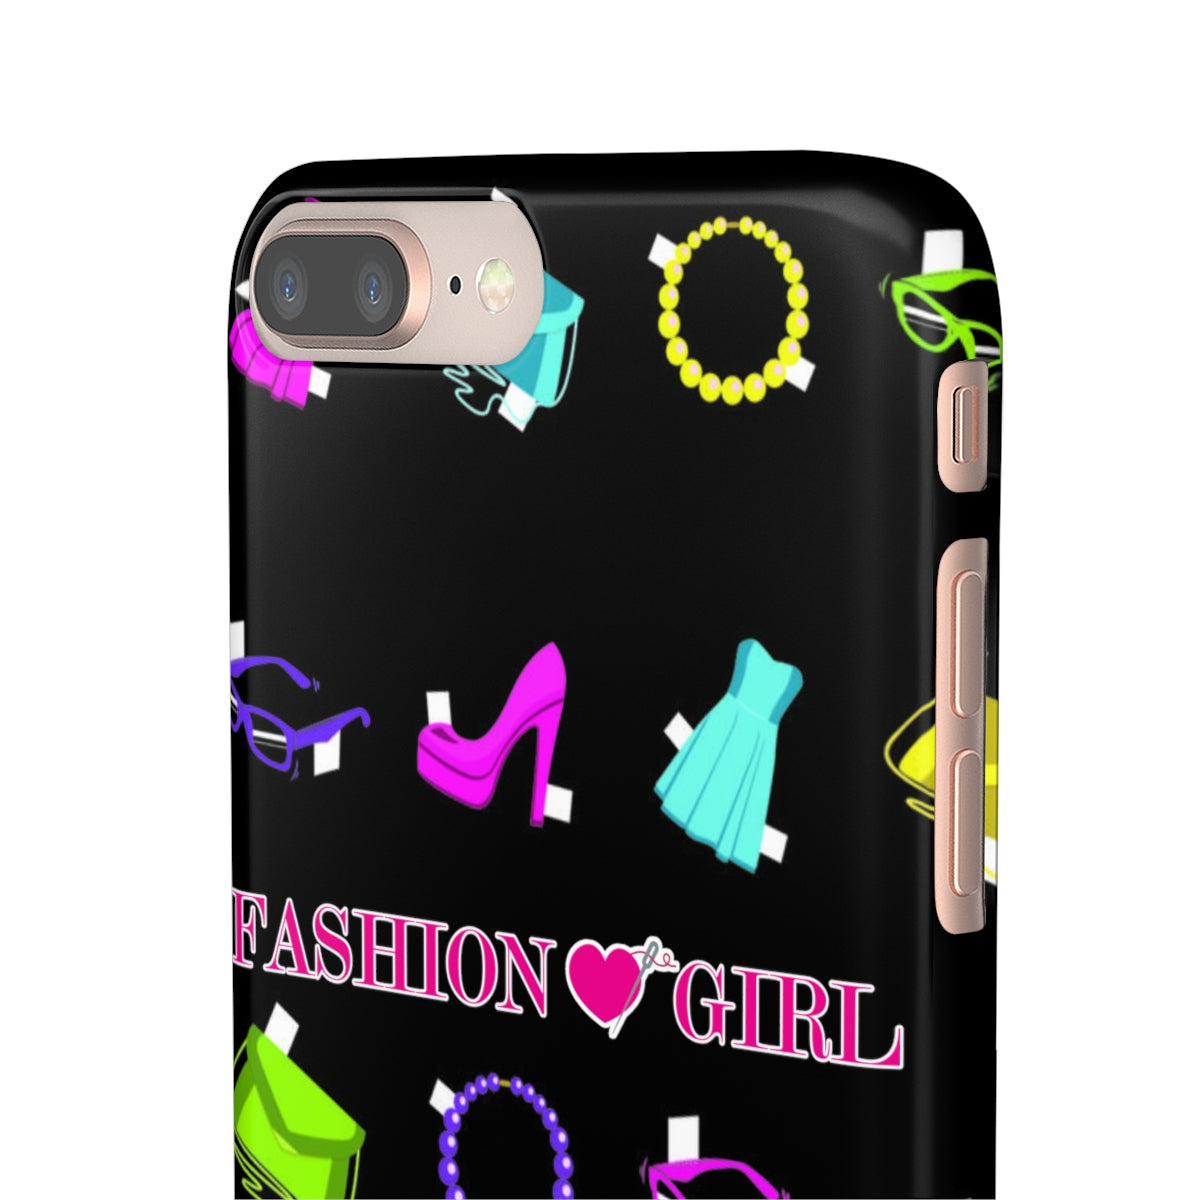 PAPER DOLLS iPhone Snap Cases